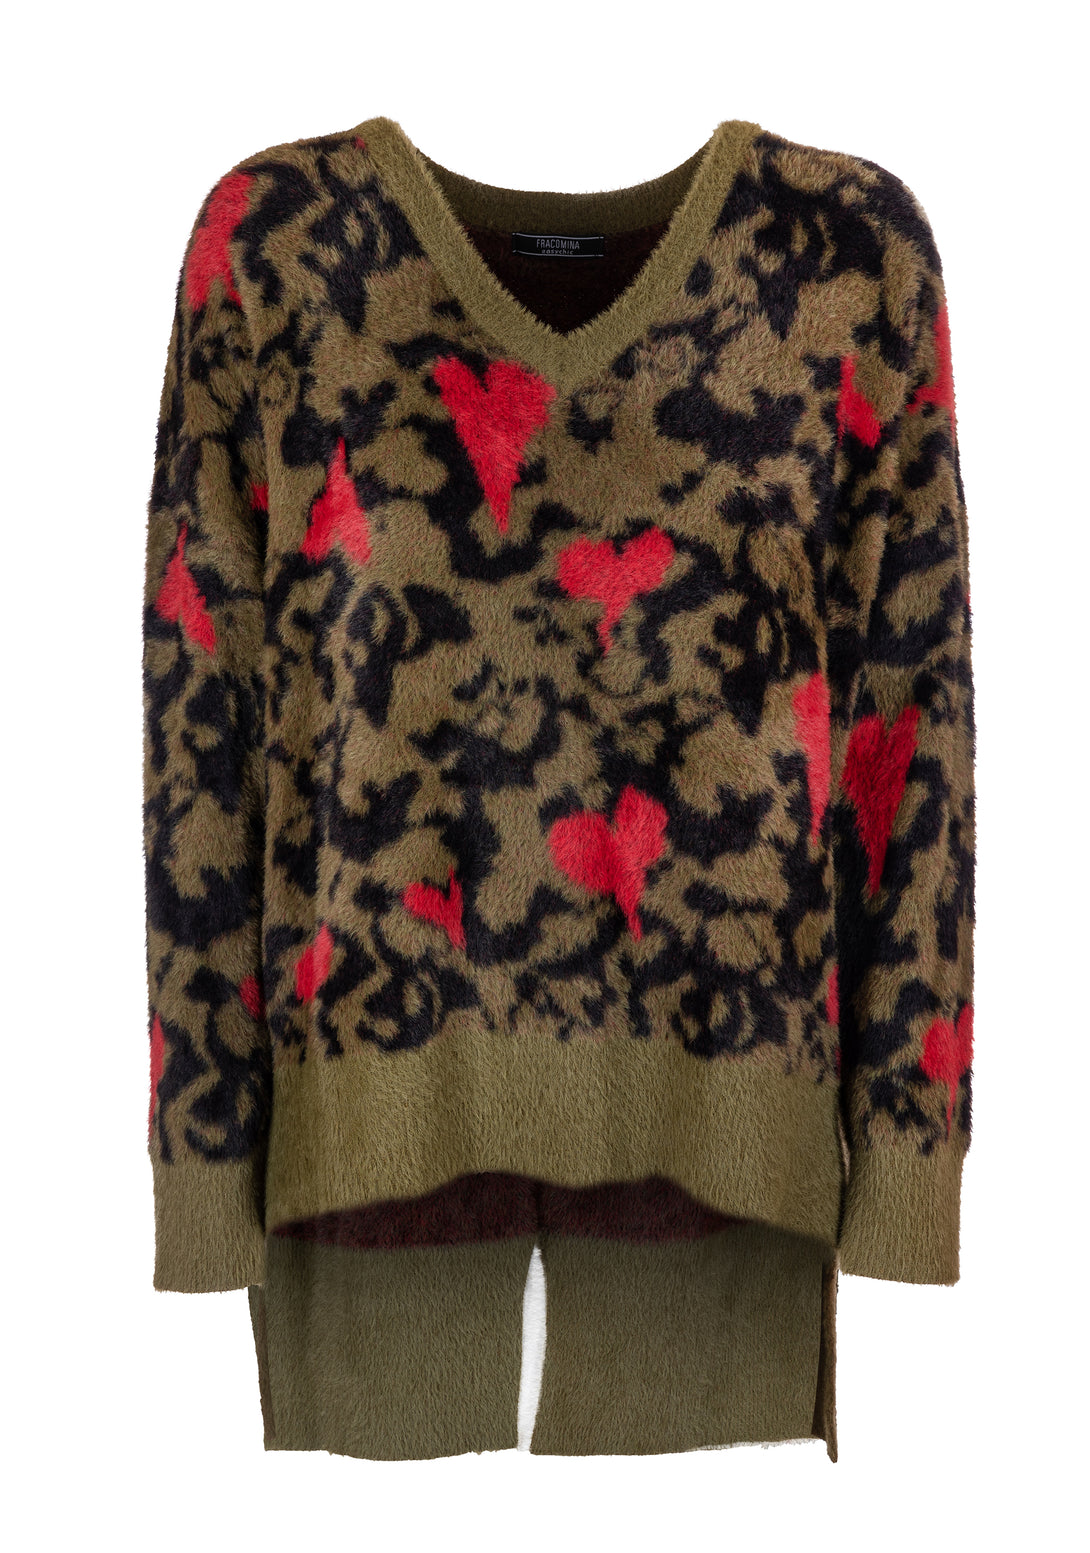 Knitwear over fit with animalier jacquard effect